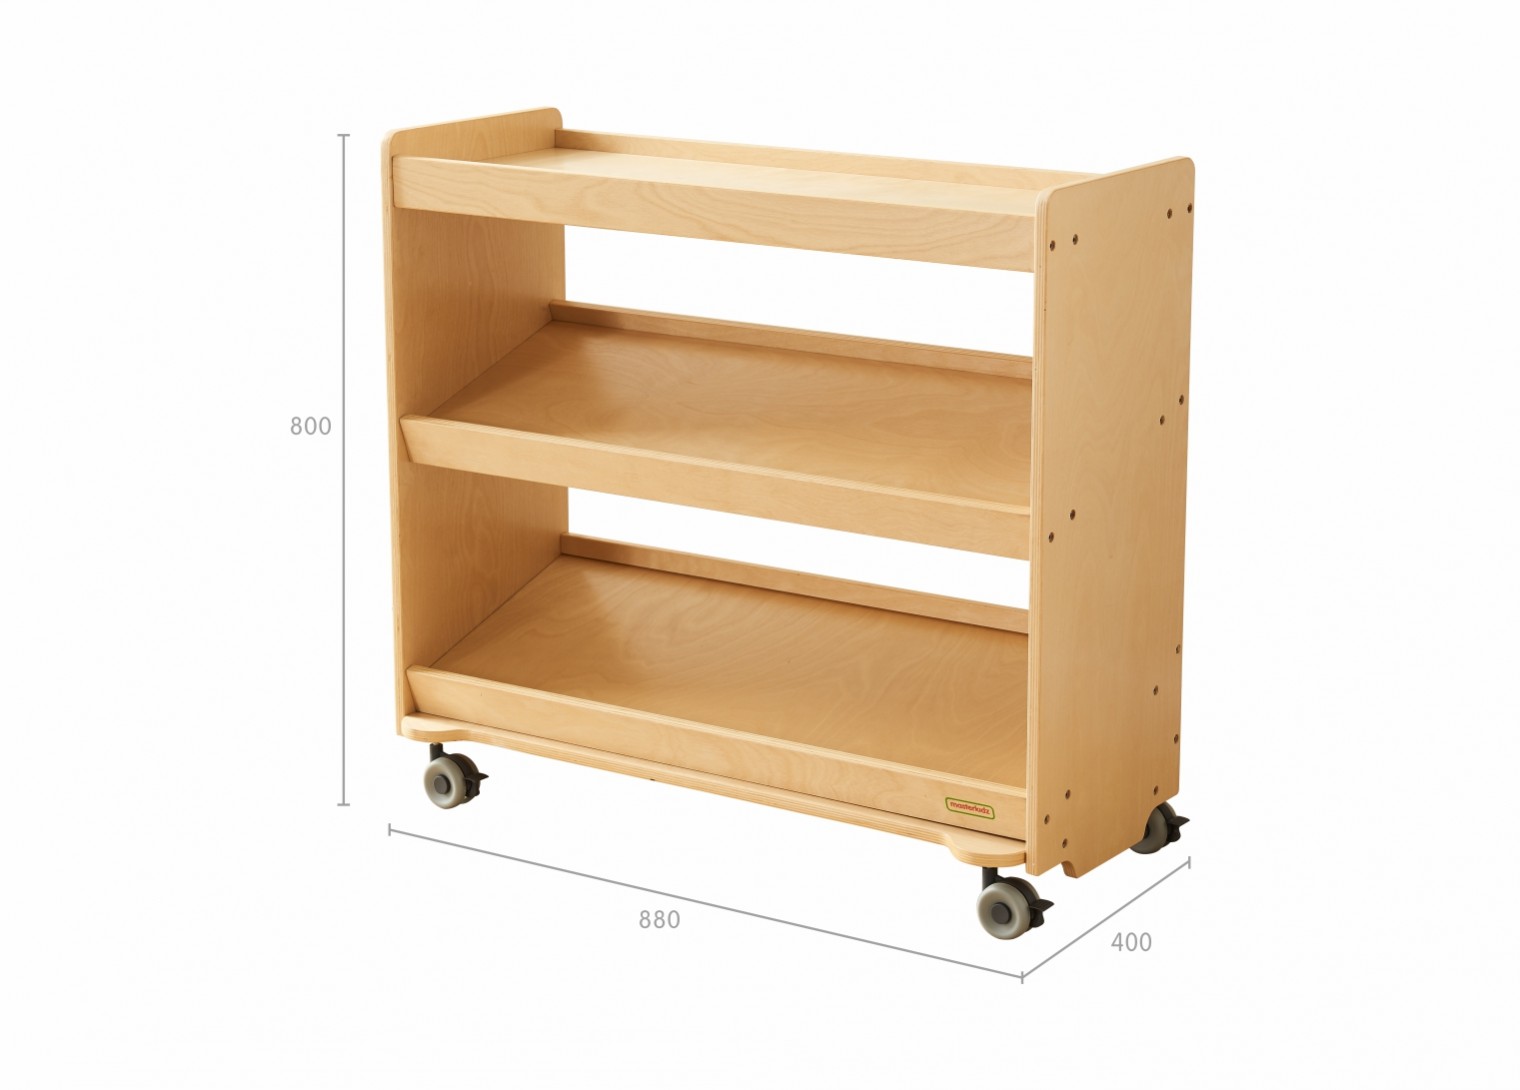 800H x 880L Mobile Shelving Unit (Trays Not Included)